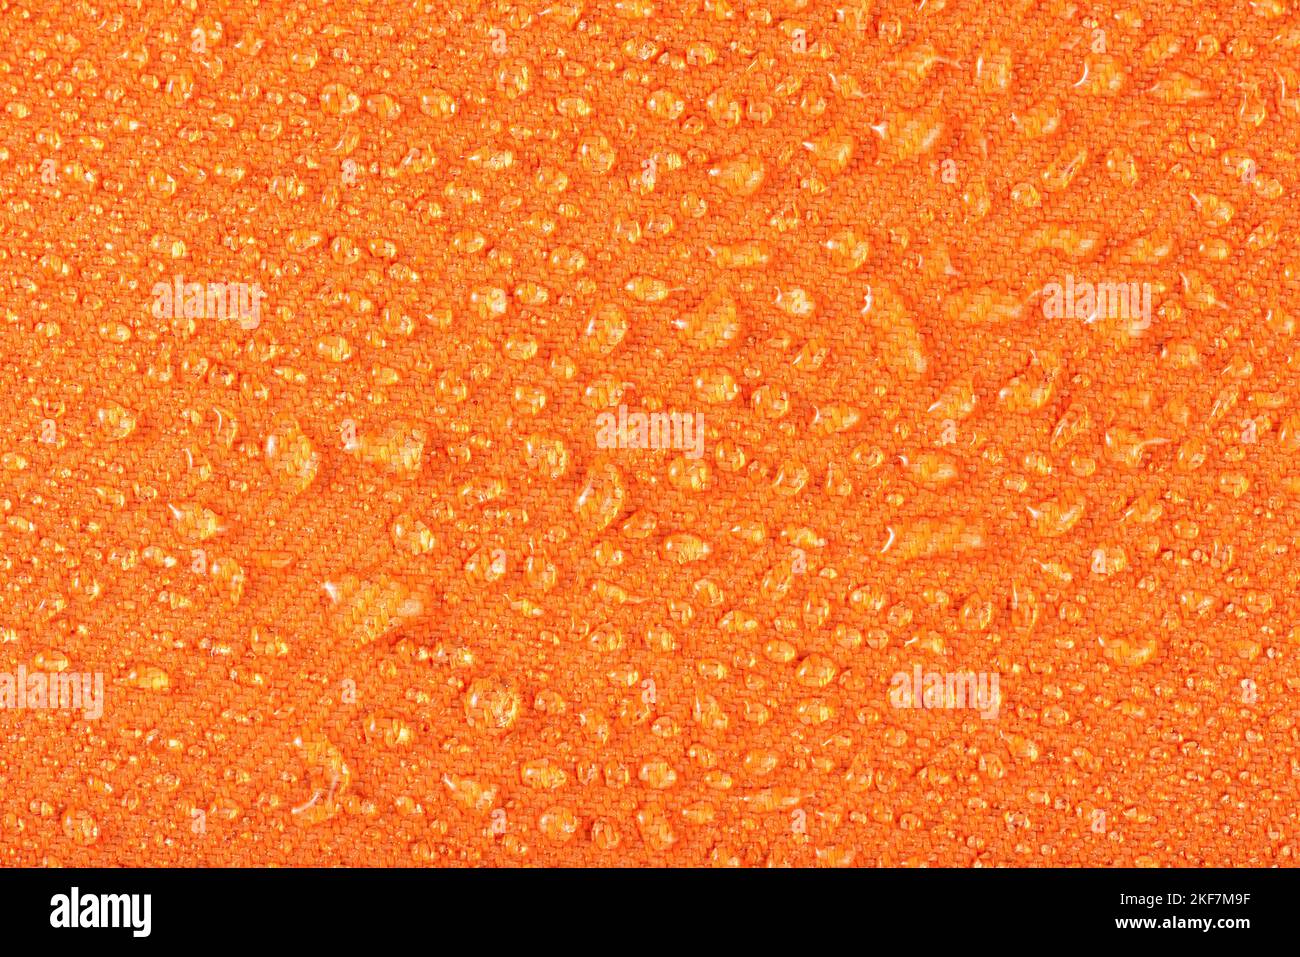 Waterproof clothing or upholstered furniture made from waterproof textiles. Drops of water on orange textiles with water-repellent properties. Stock Photo